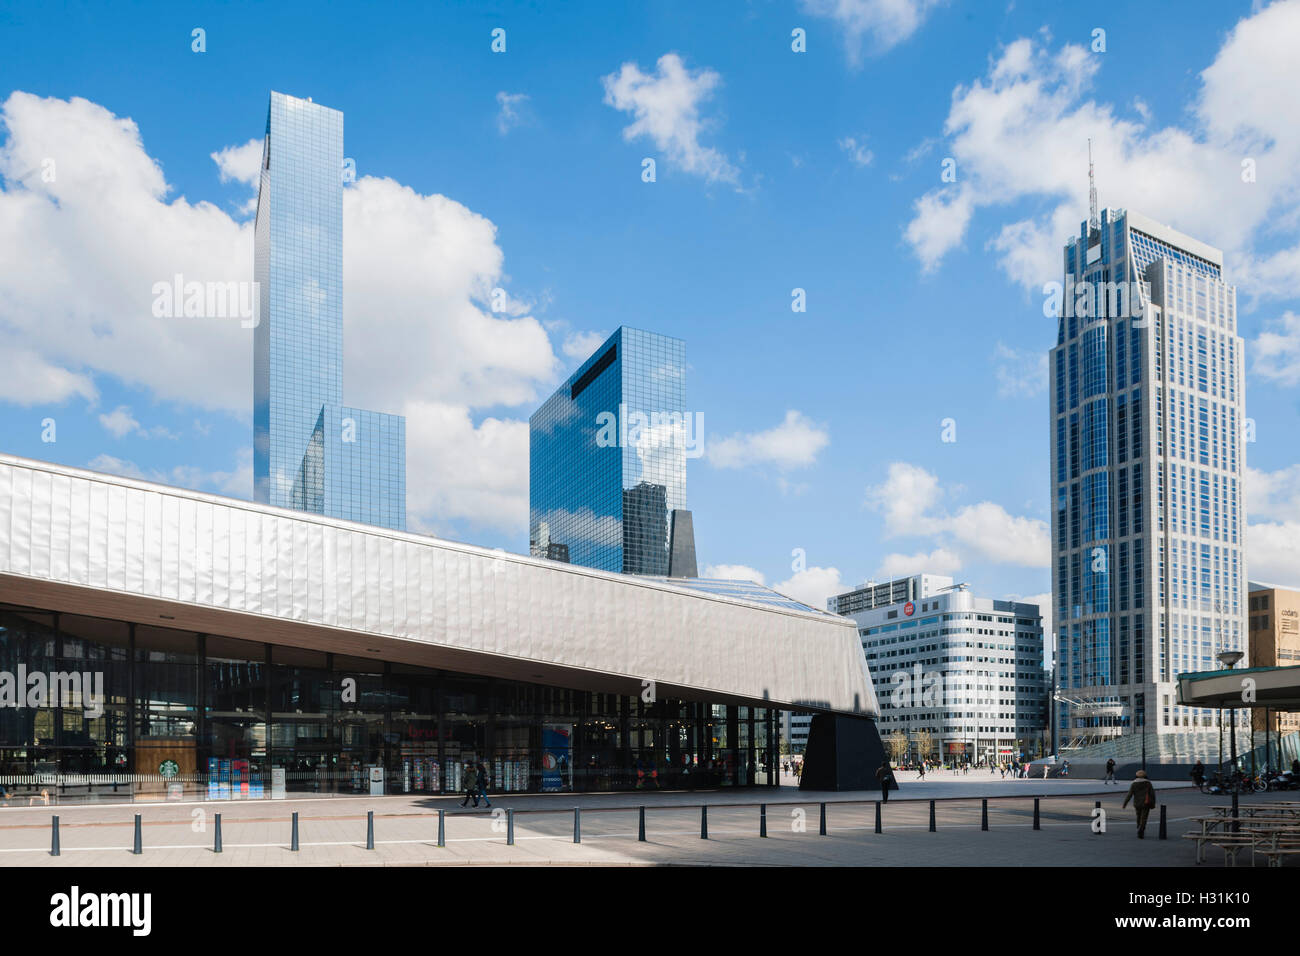 View of lateral entrance to station showing metal clad roof and high rise buildings on the background. Centraal Station, Rotterdam, Netherlands. Architect: Benthem Crouwel Architects + MVSA Architects + Wes, 2014. Stock Photo